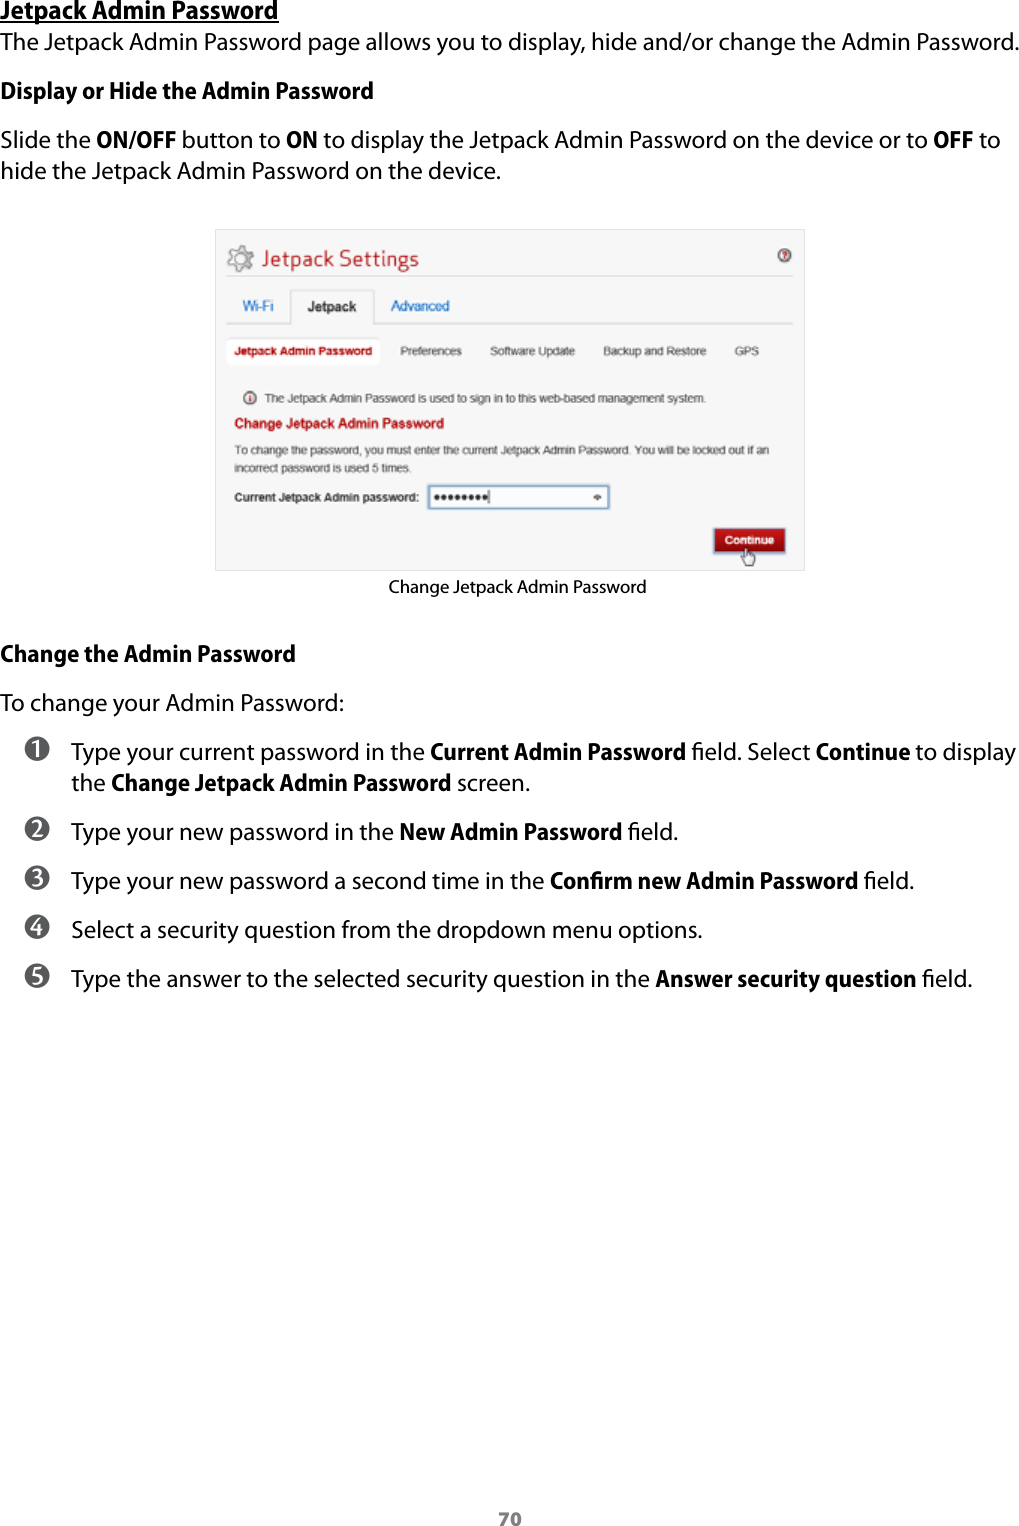 70Jetpack Admin PasswordThe Jetpack Admin Password page allows you to display, hide and/or change the Admin Password.Display or Hide the Admin PasswordSlide the ON/OFF button to ON to display the Jetpack Admin Password on the device or to OFF to hide the Jetpack Admin Password on the device.Change Jetpack Admin PasswordChange the Admin PasswordTo change your Admin Password: ➊ Type your current password in the Current Admin Password eld. Select Continue to display the Change Jetpack Admin Password screen. ➋ Type your new password in the New Admin Password eld. ➌ Type your new password a second time in the Conﬁrm new Admin Password eld. ➍ Select a security question from the dropdown menu options. ➎ Type the answer to the selected security question in the Answer security question eld.